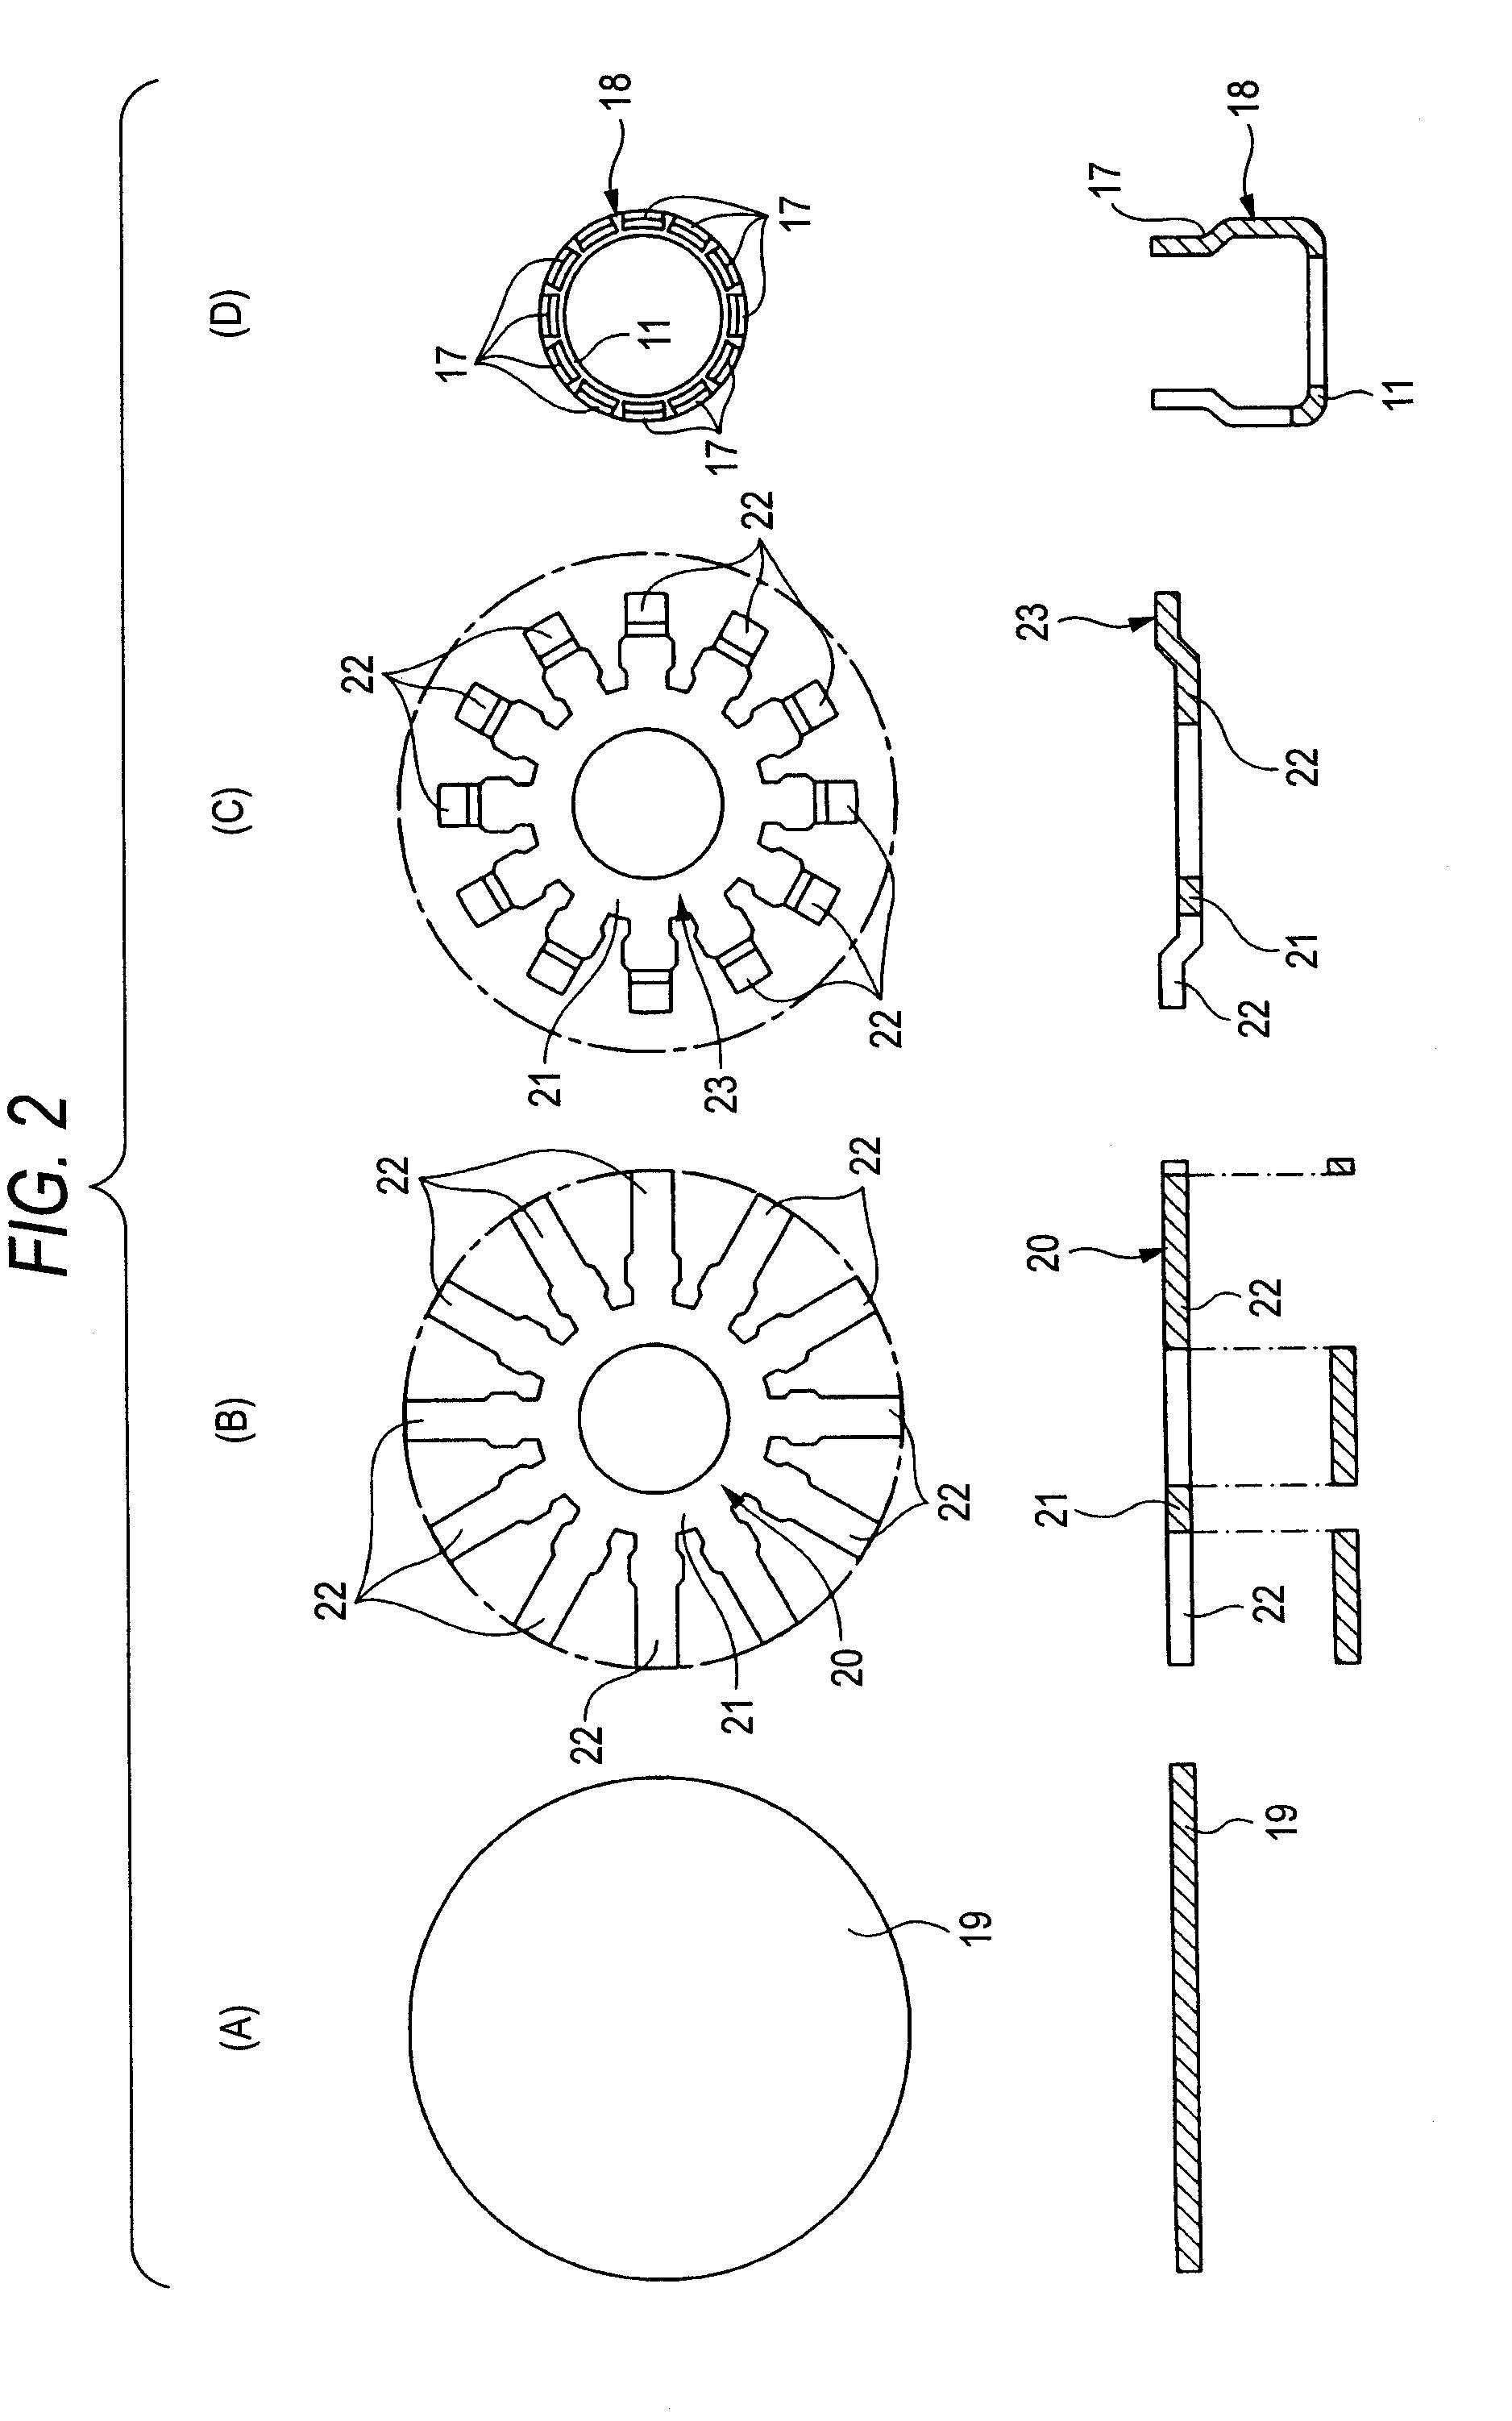 Cage for Radial Needle Bearing, Method for Manufacturing the Same and Radial Needle Bearing